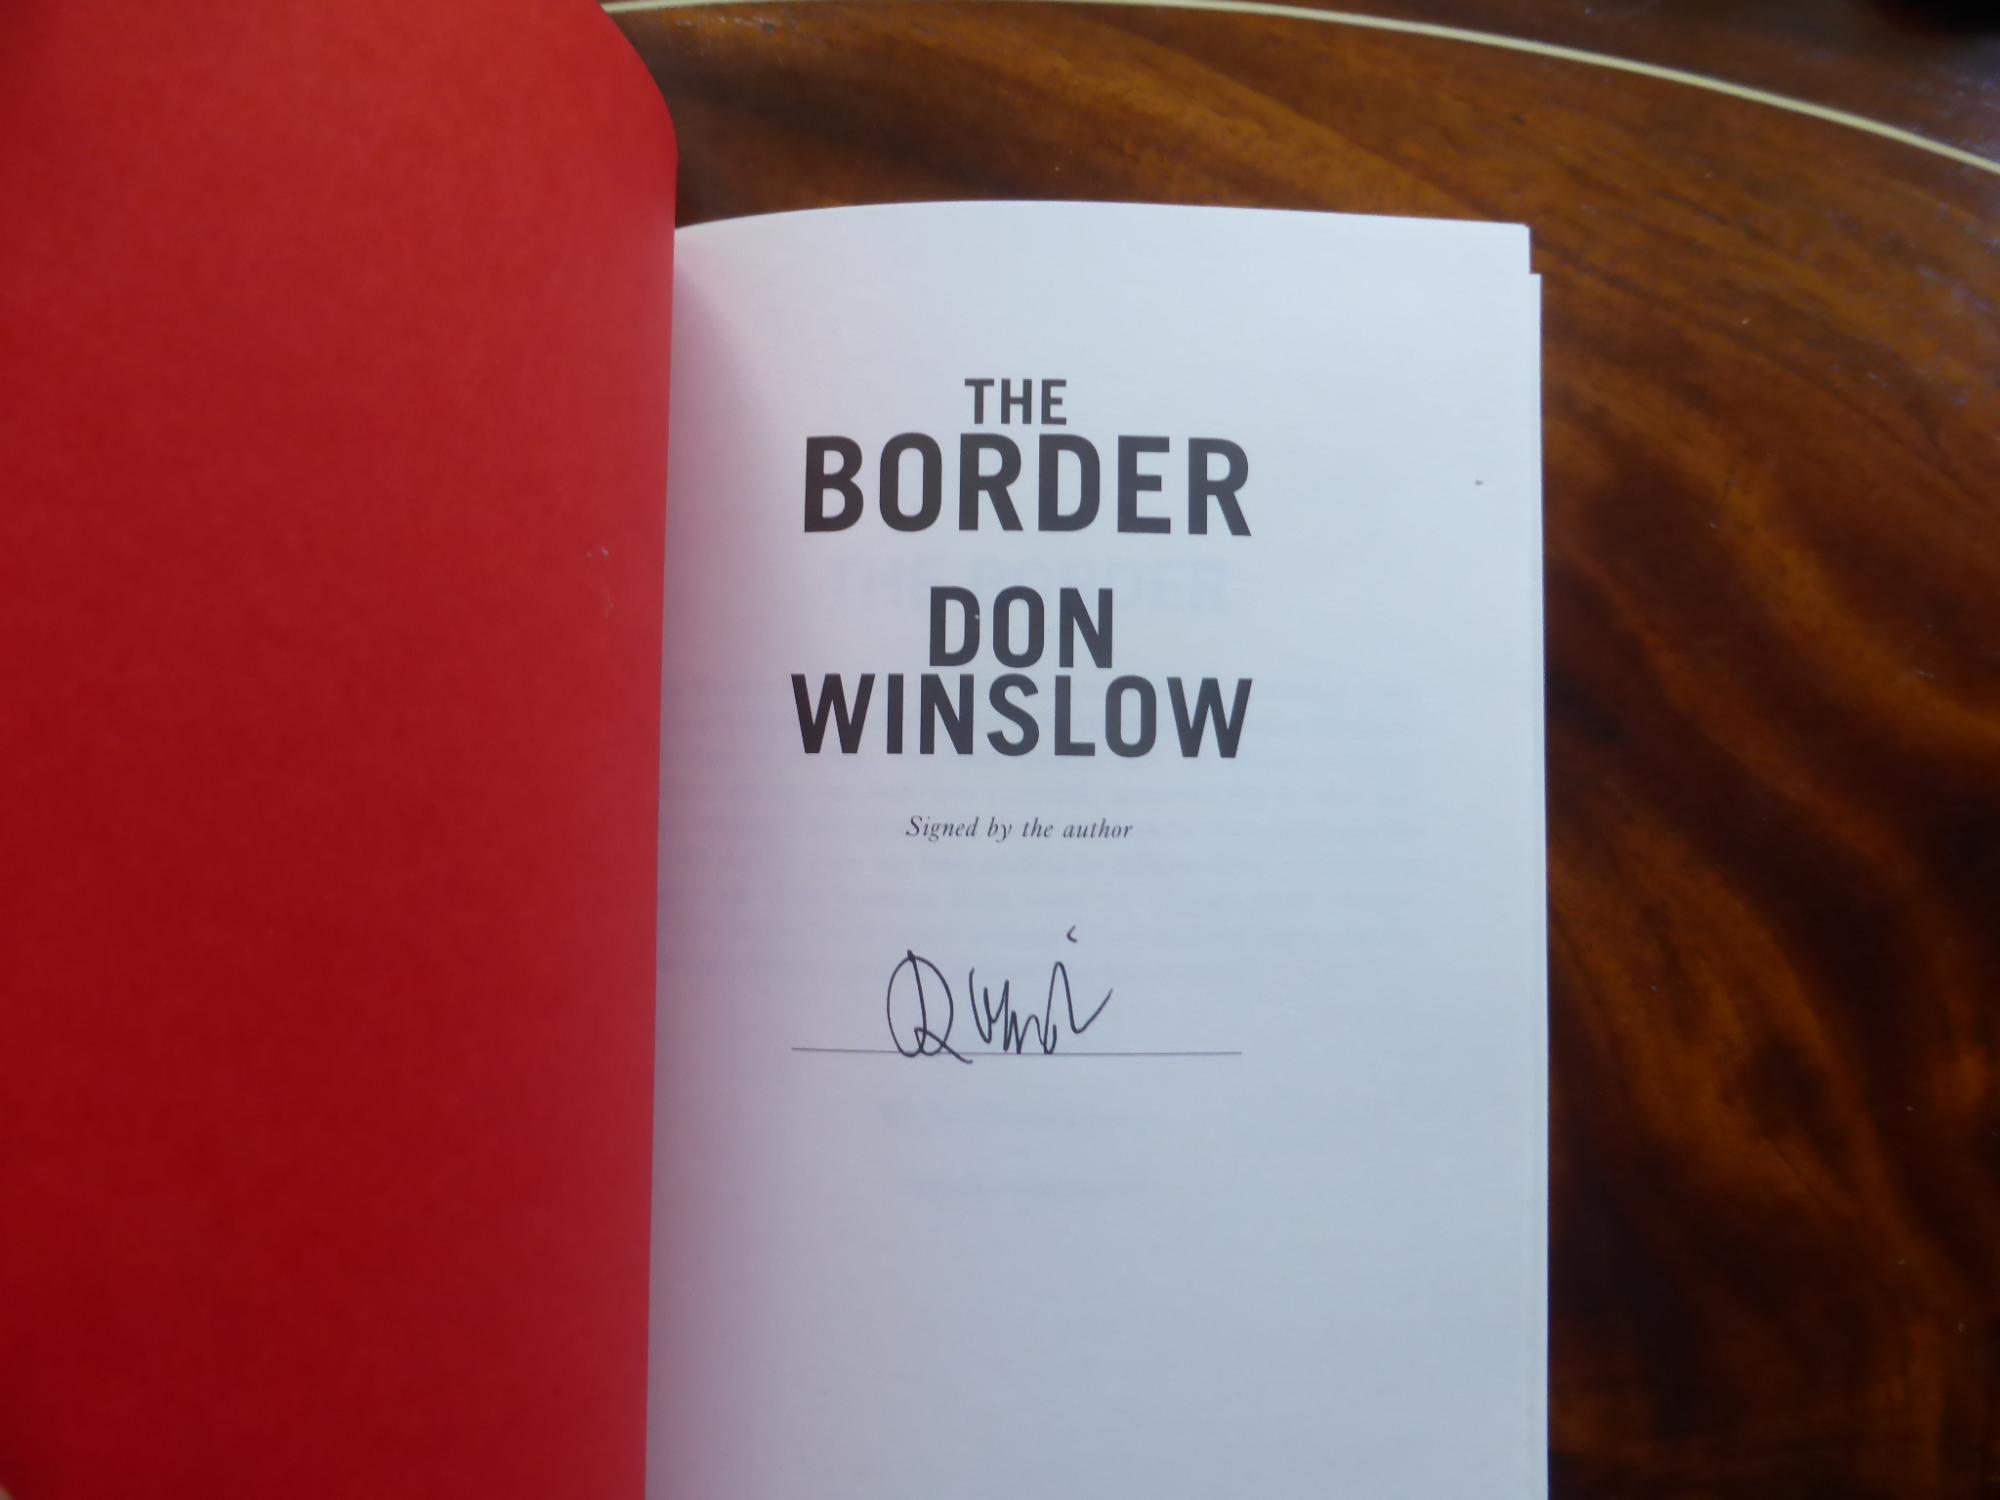 Books by Don Winslow 